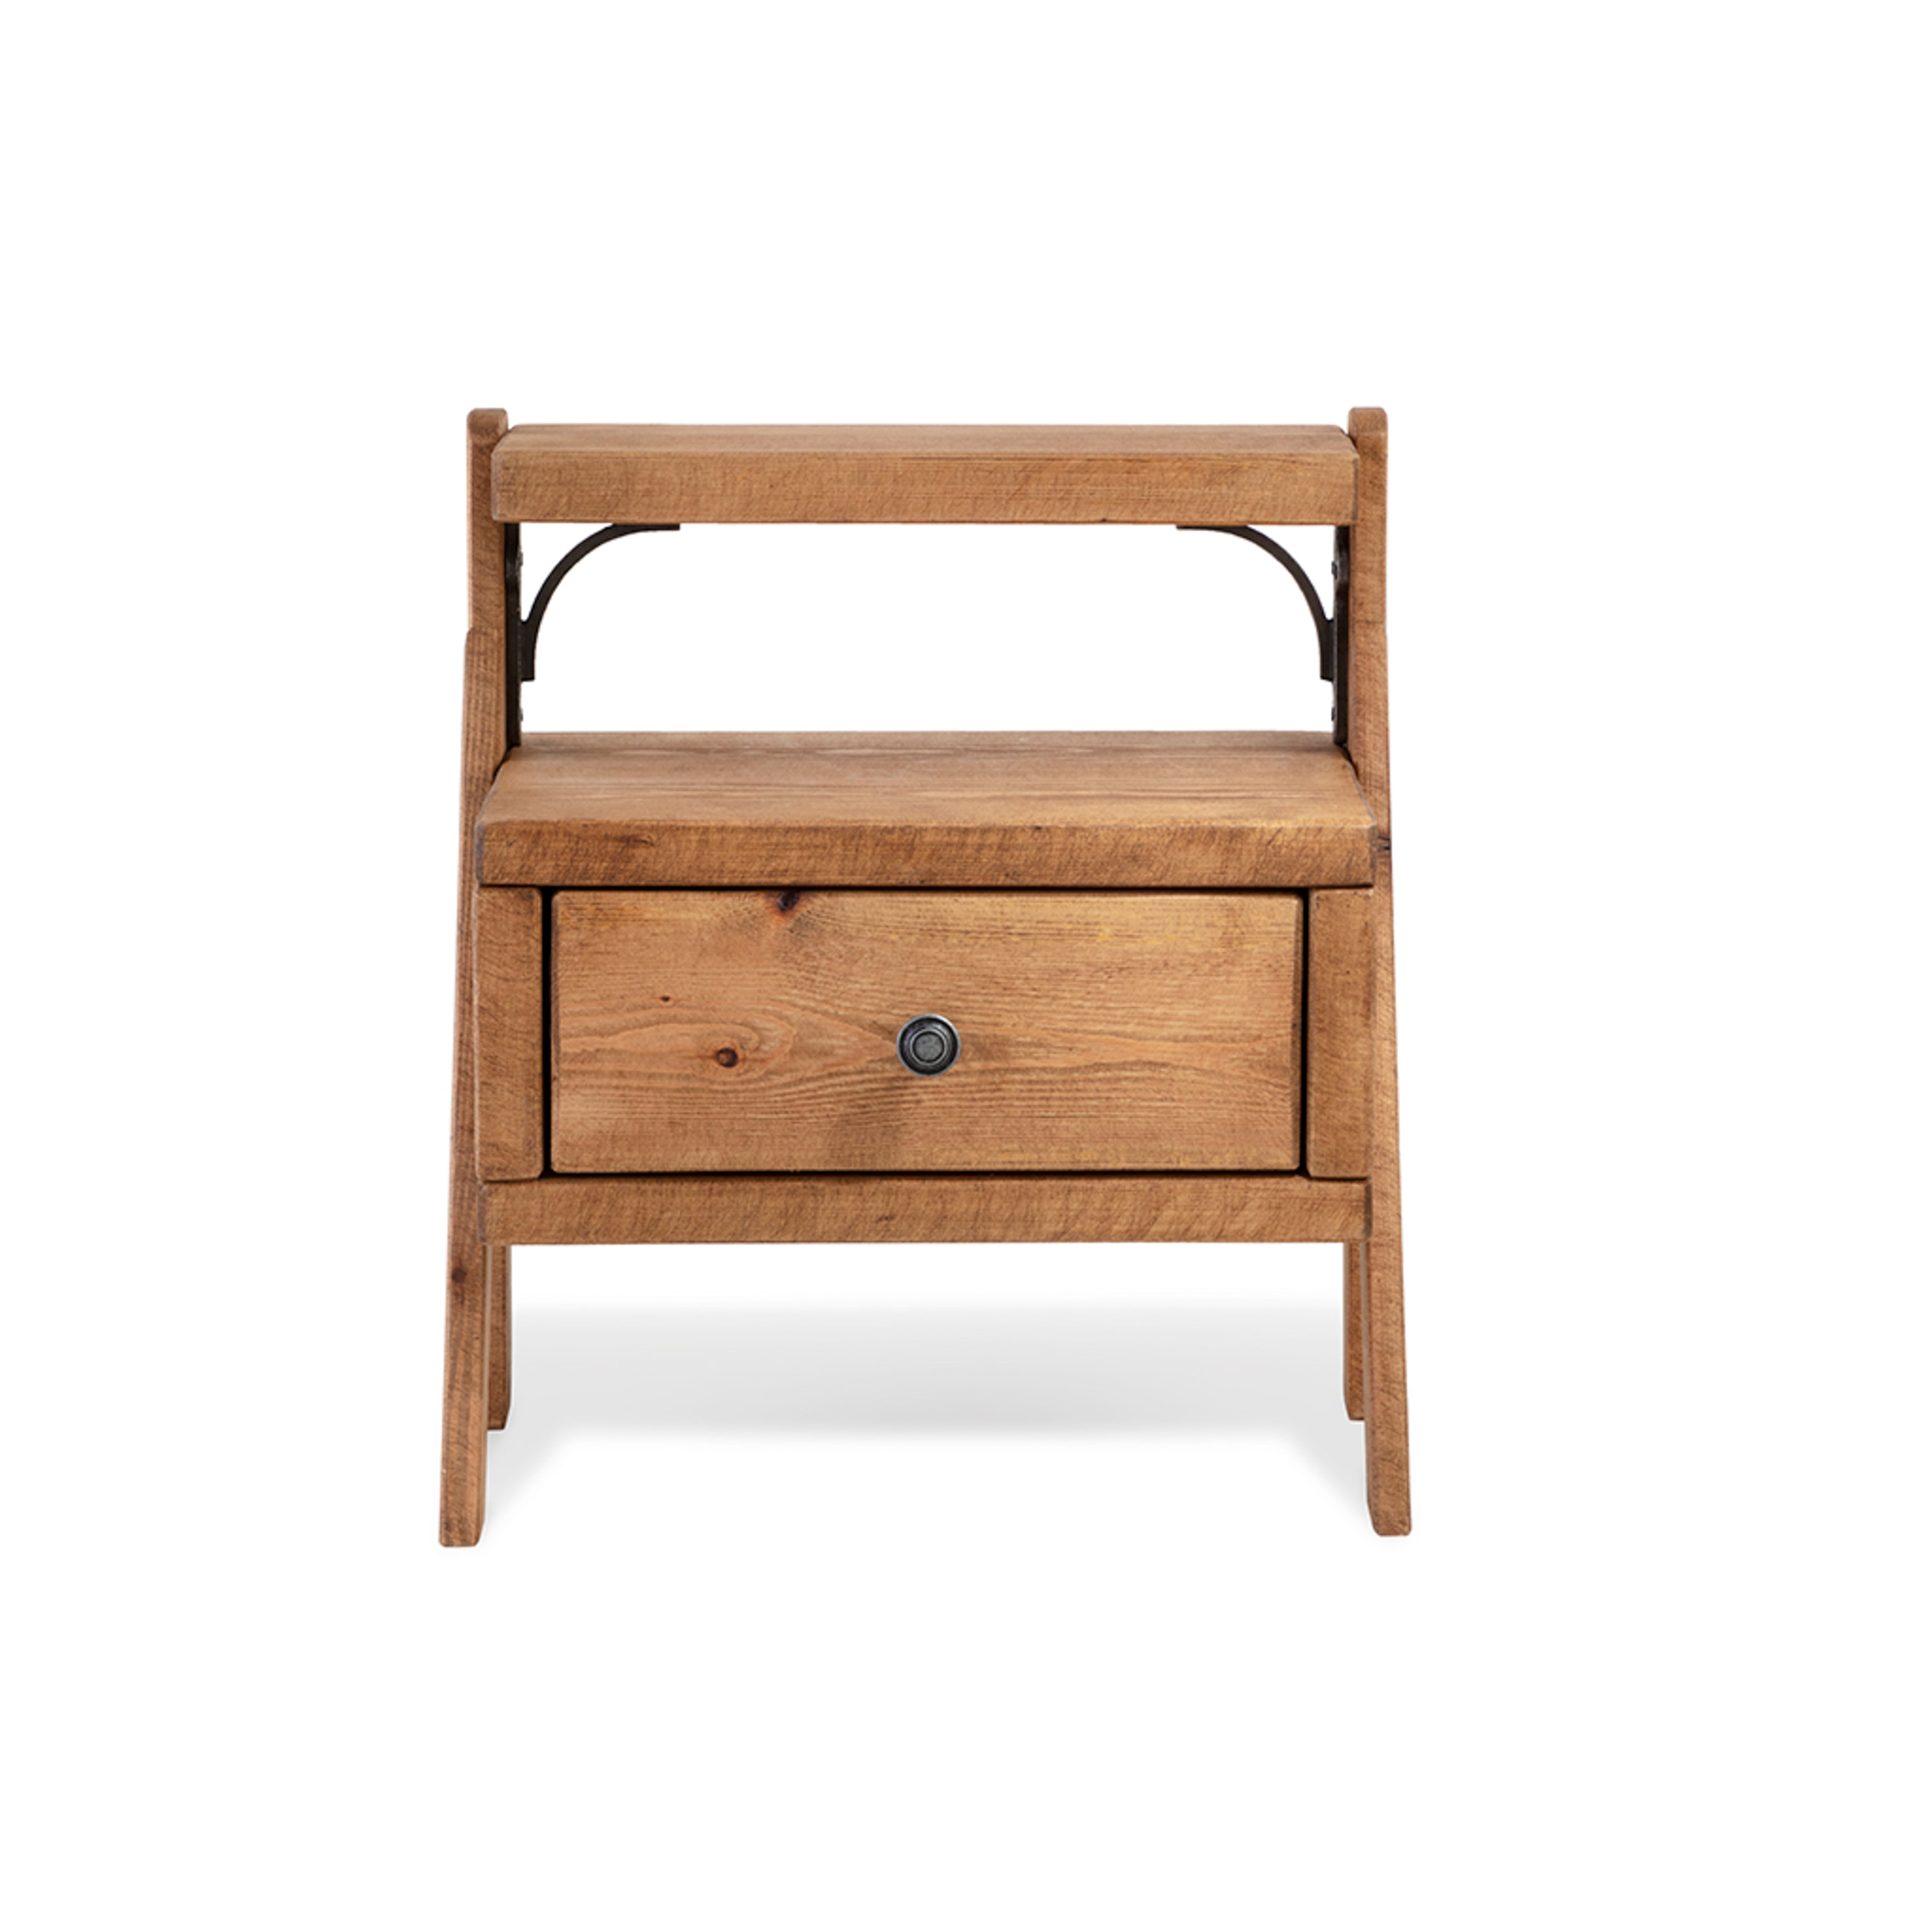 Heaton Ladder Style Bedside Table - Beds & Accessories